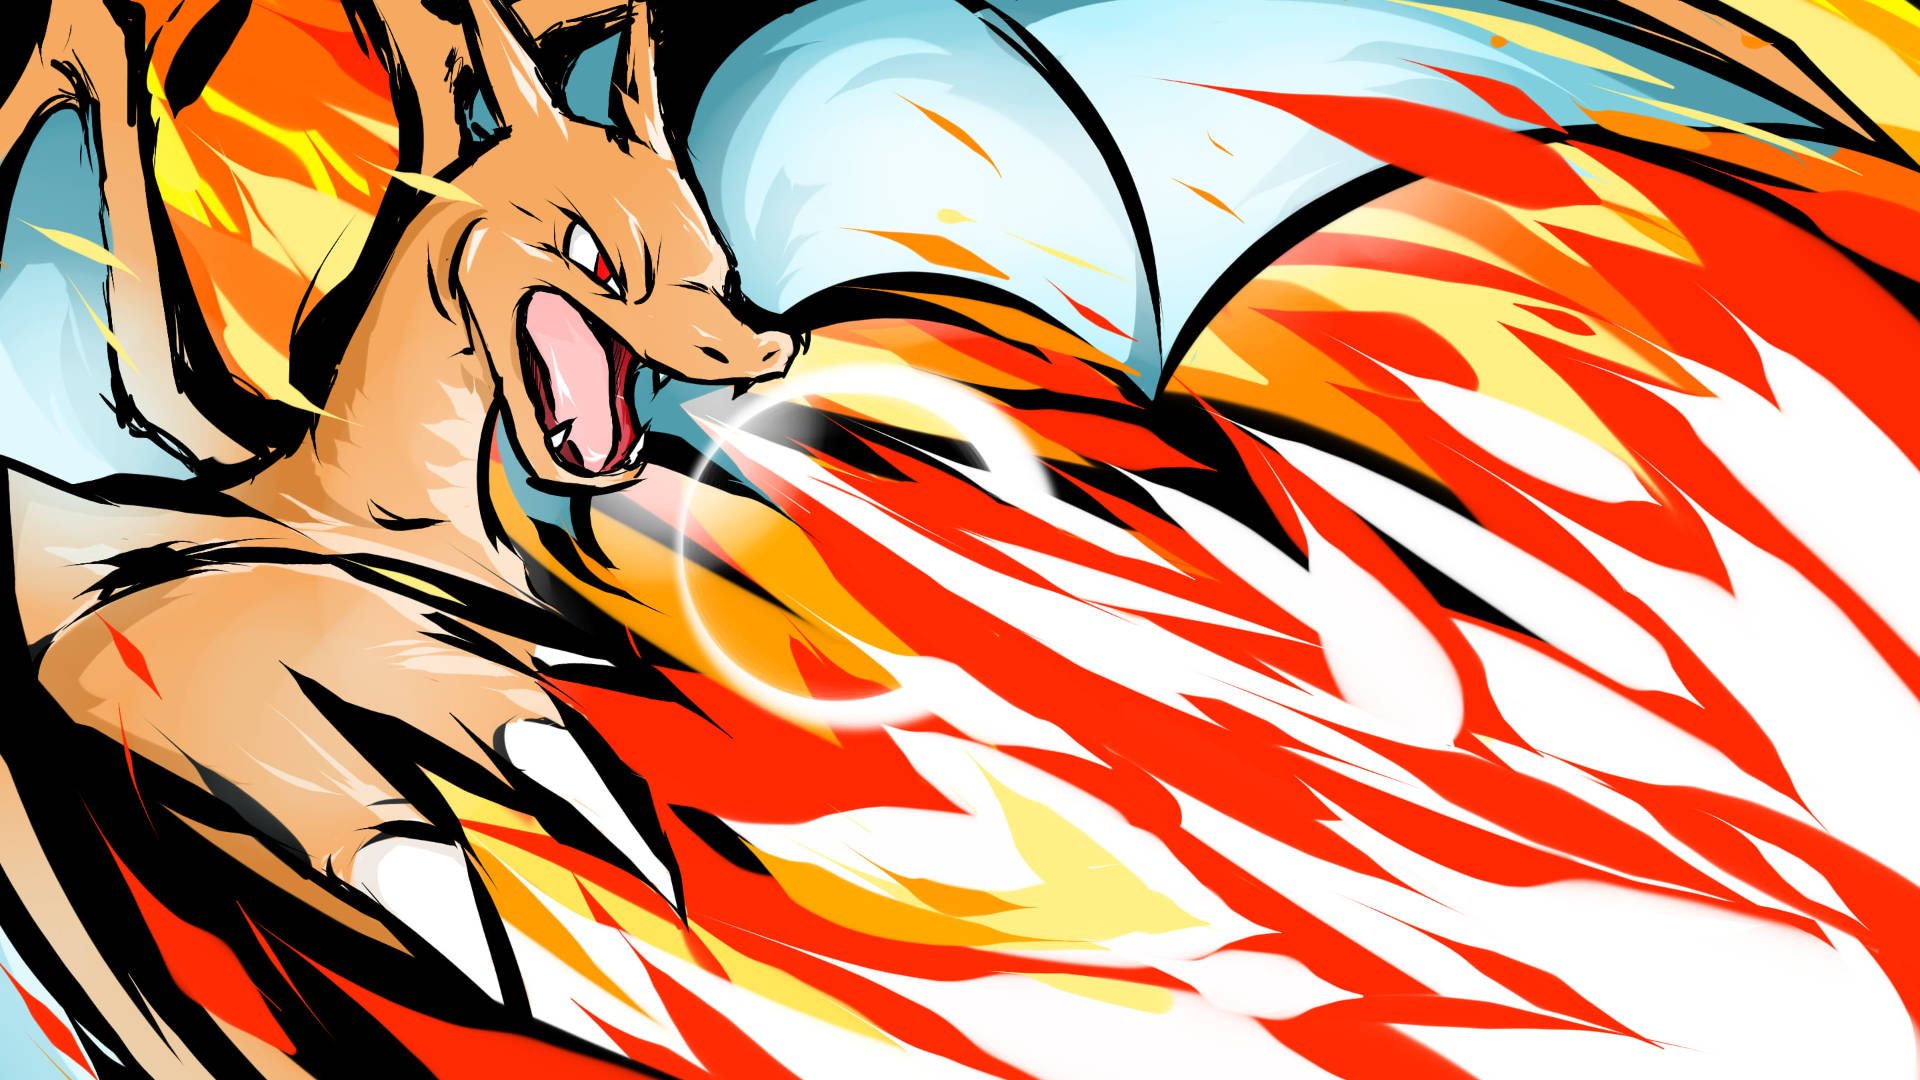 Charizard Breathes Fire And Soars The Skies! Background